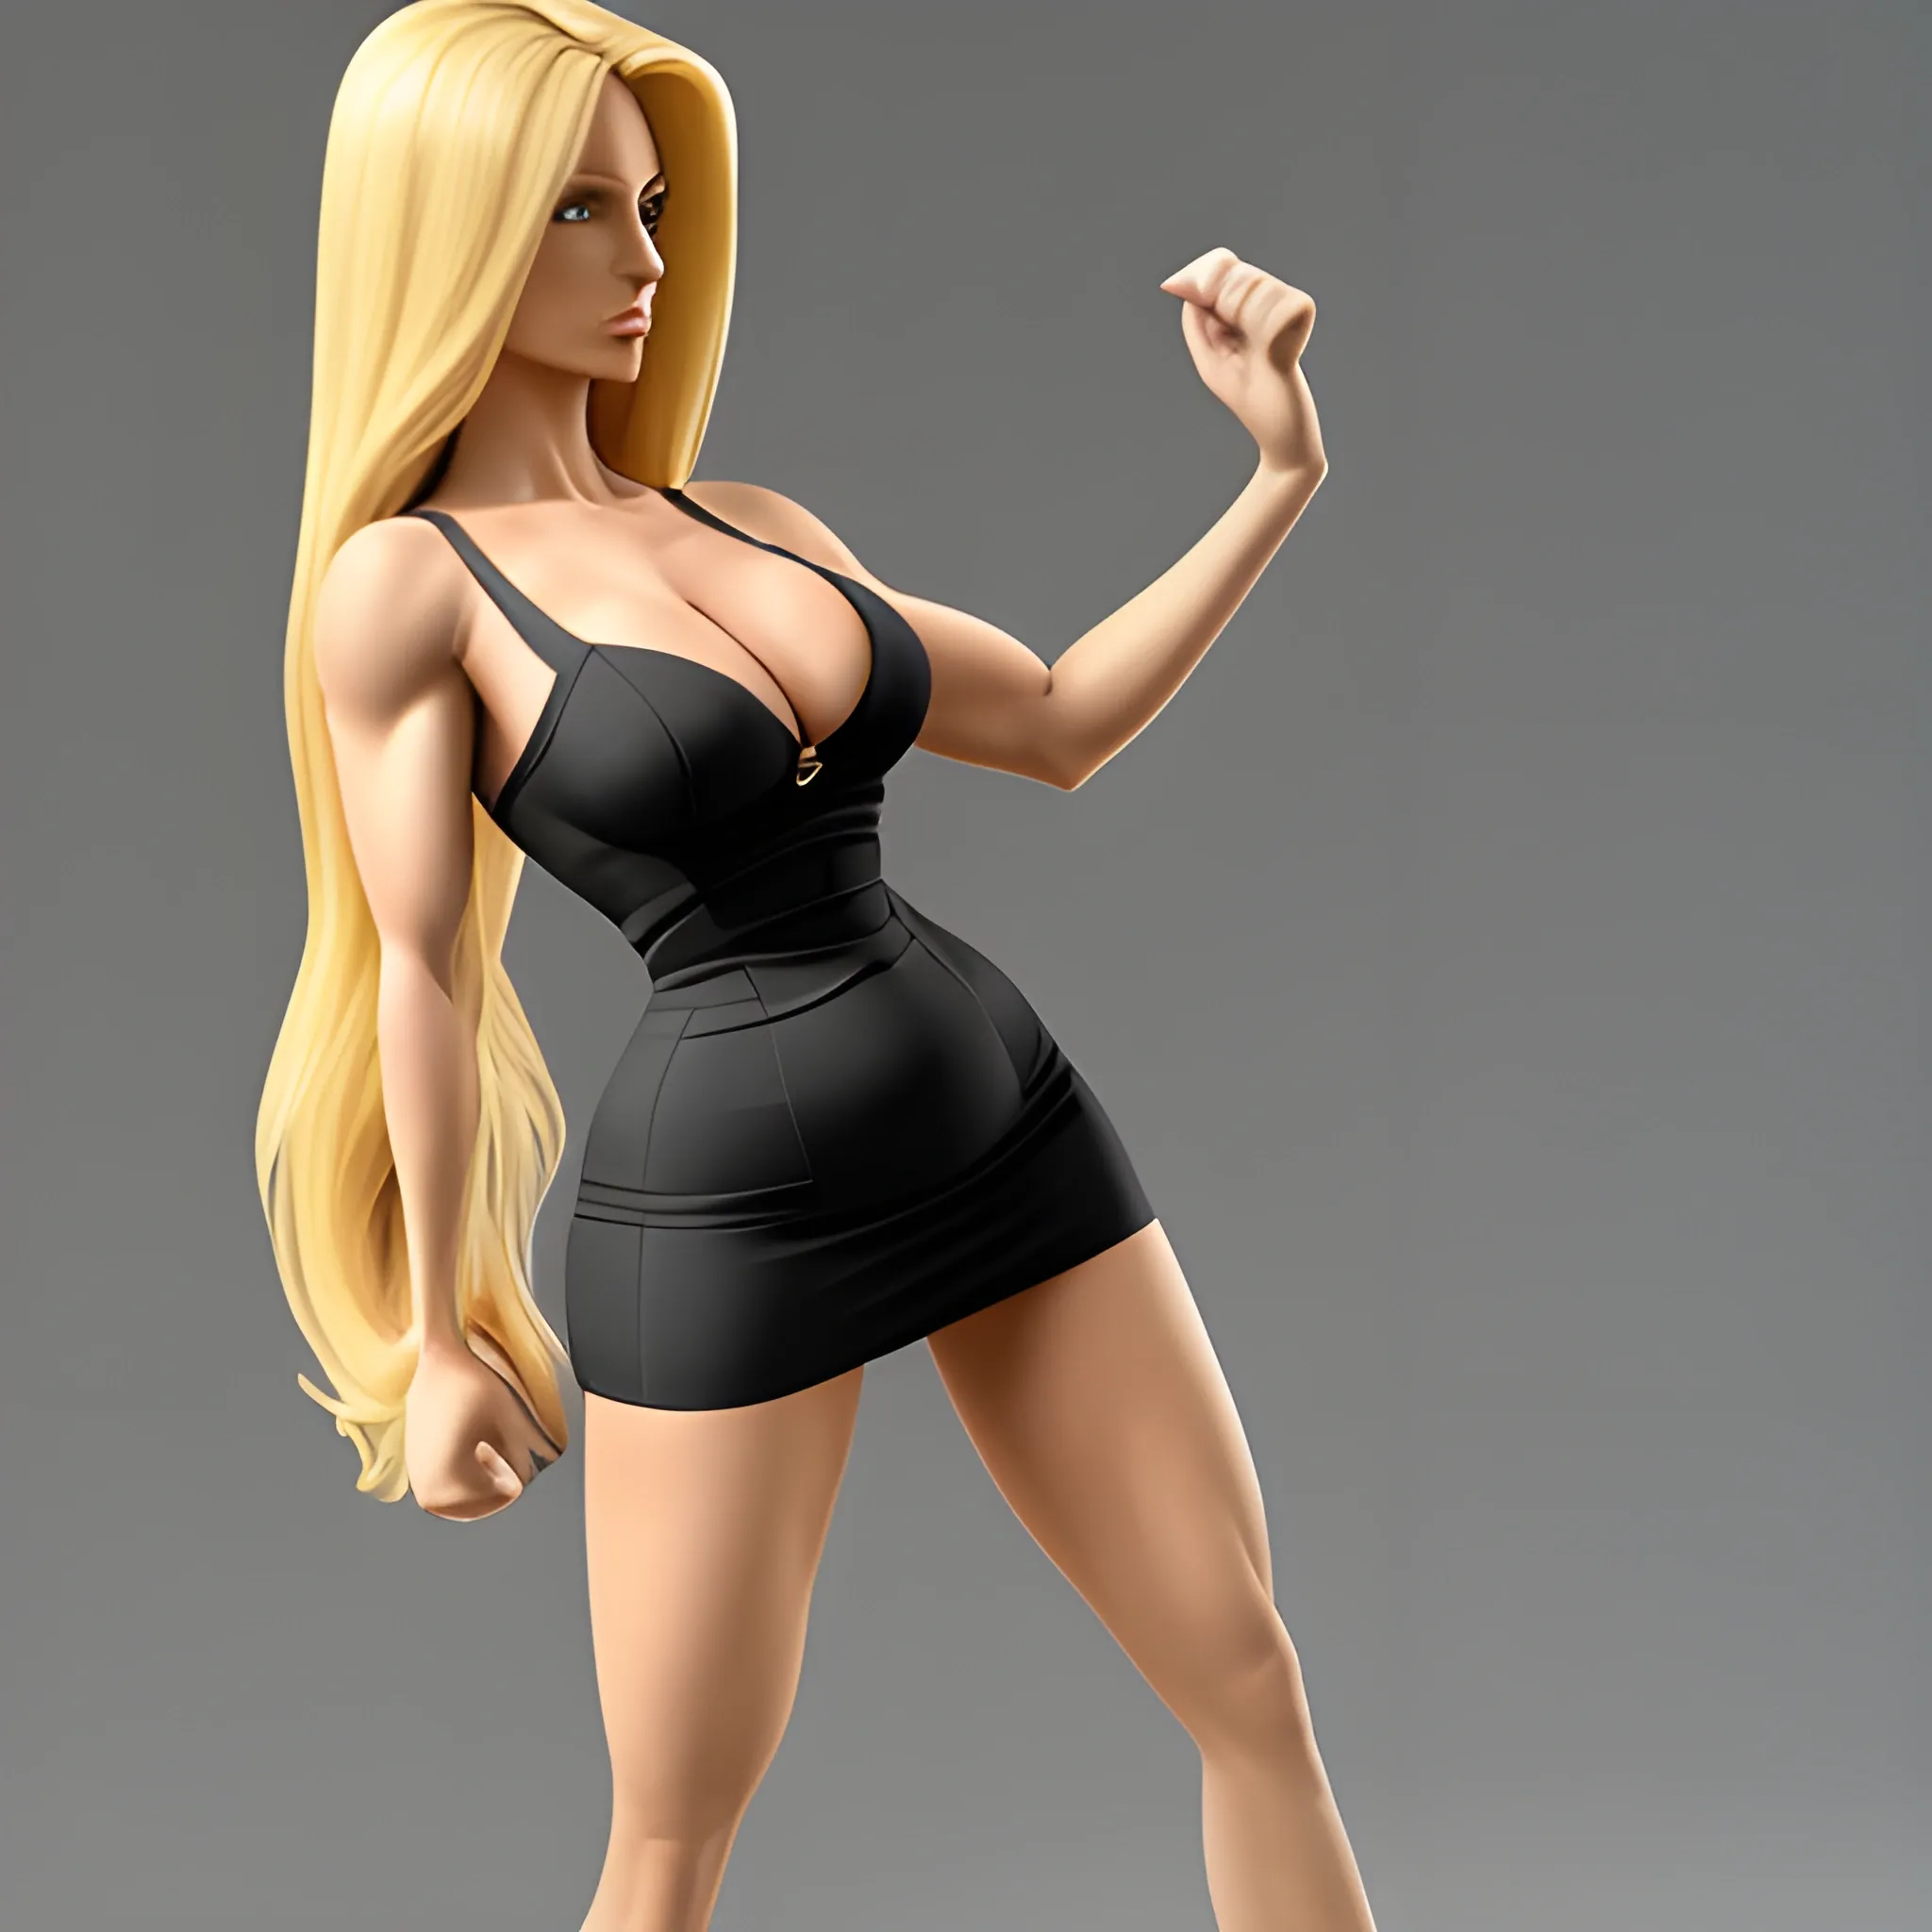 Slightly muscular, very long and thick blonde hair, dramatic hourglass figure, five-foot five-inches tall, wearing high-heels, flattering business suit, 3D